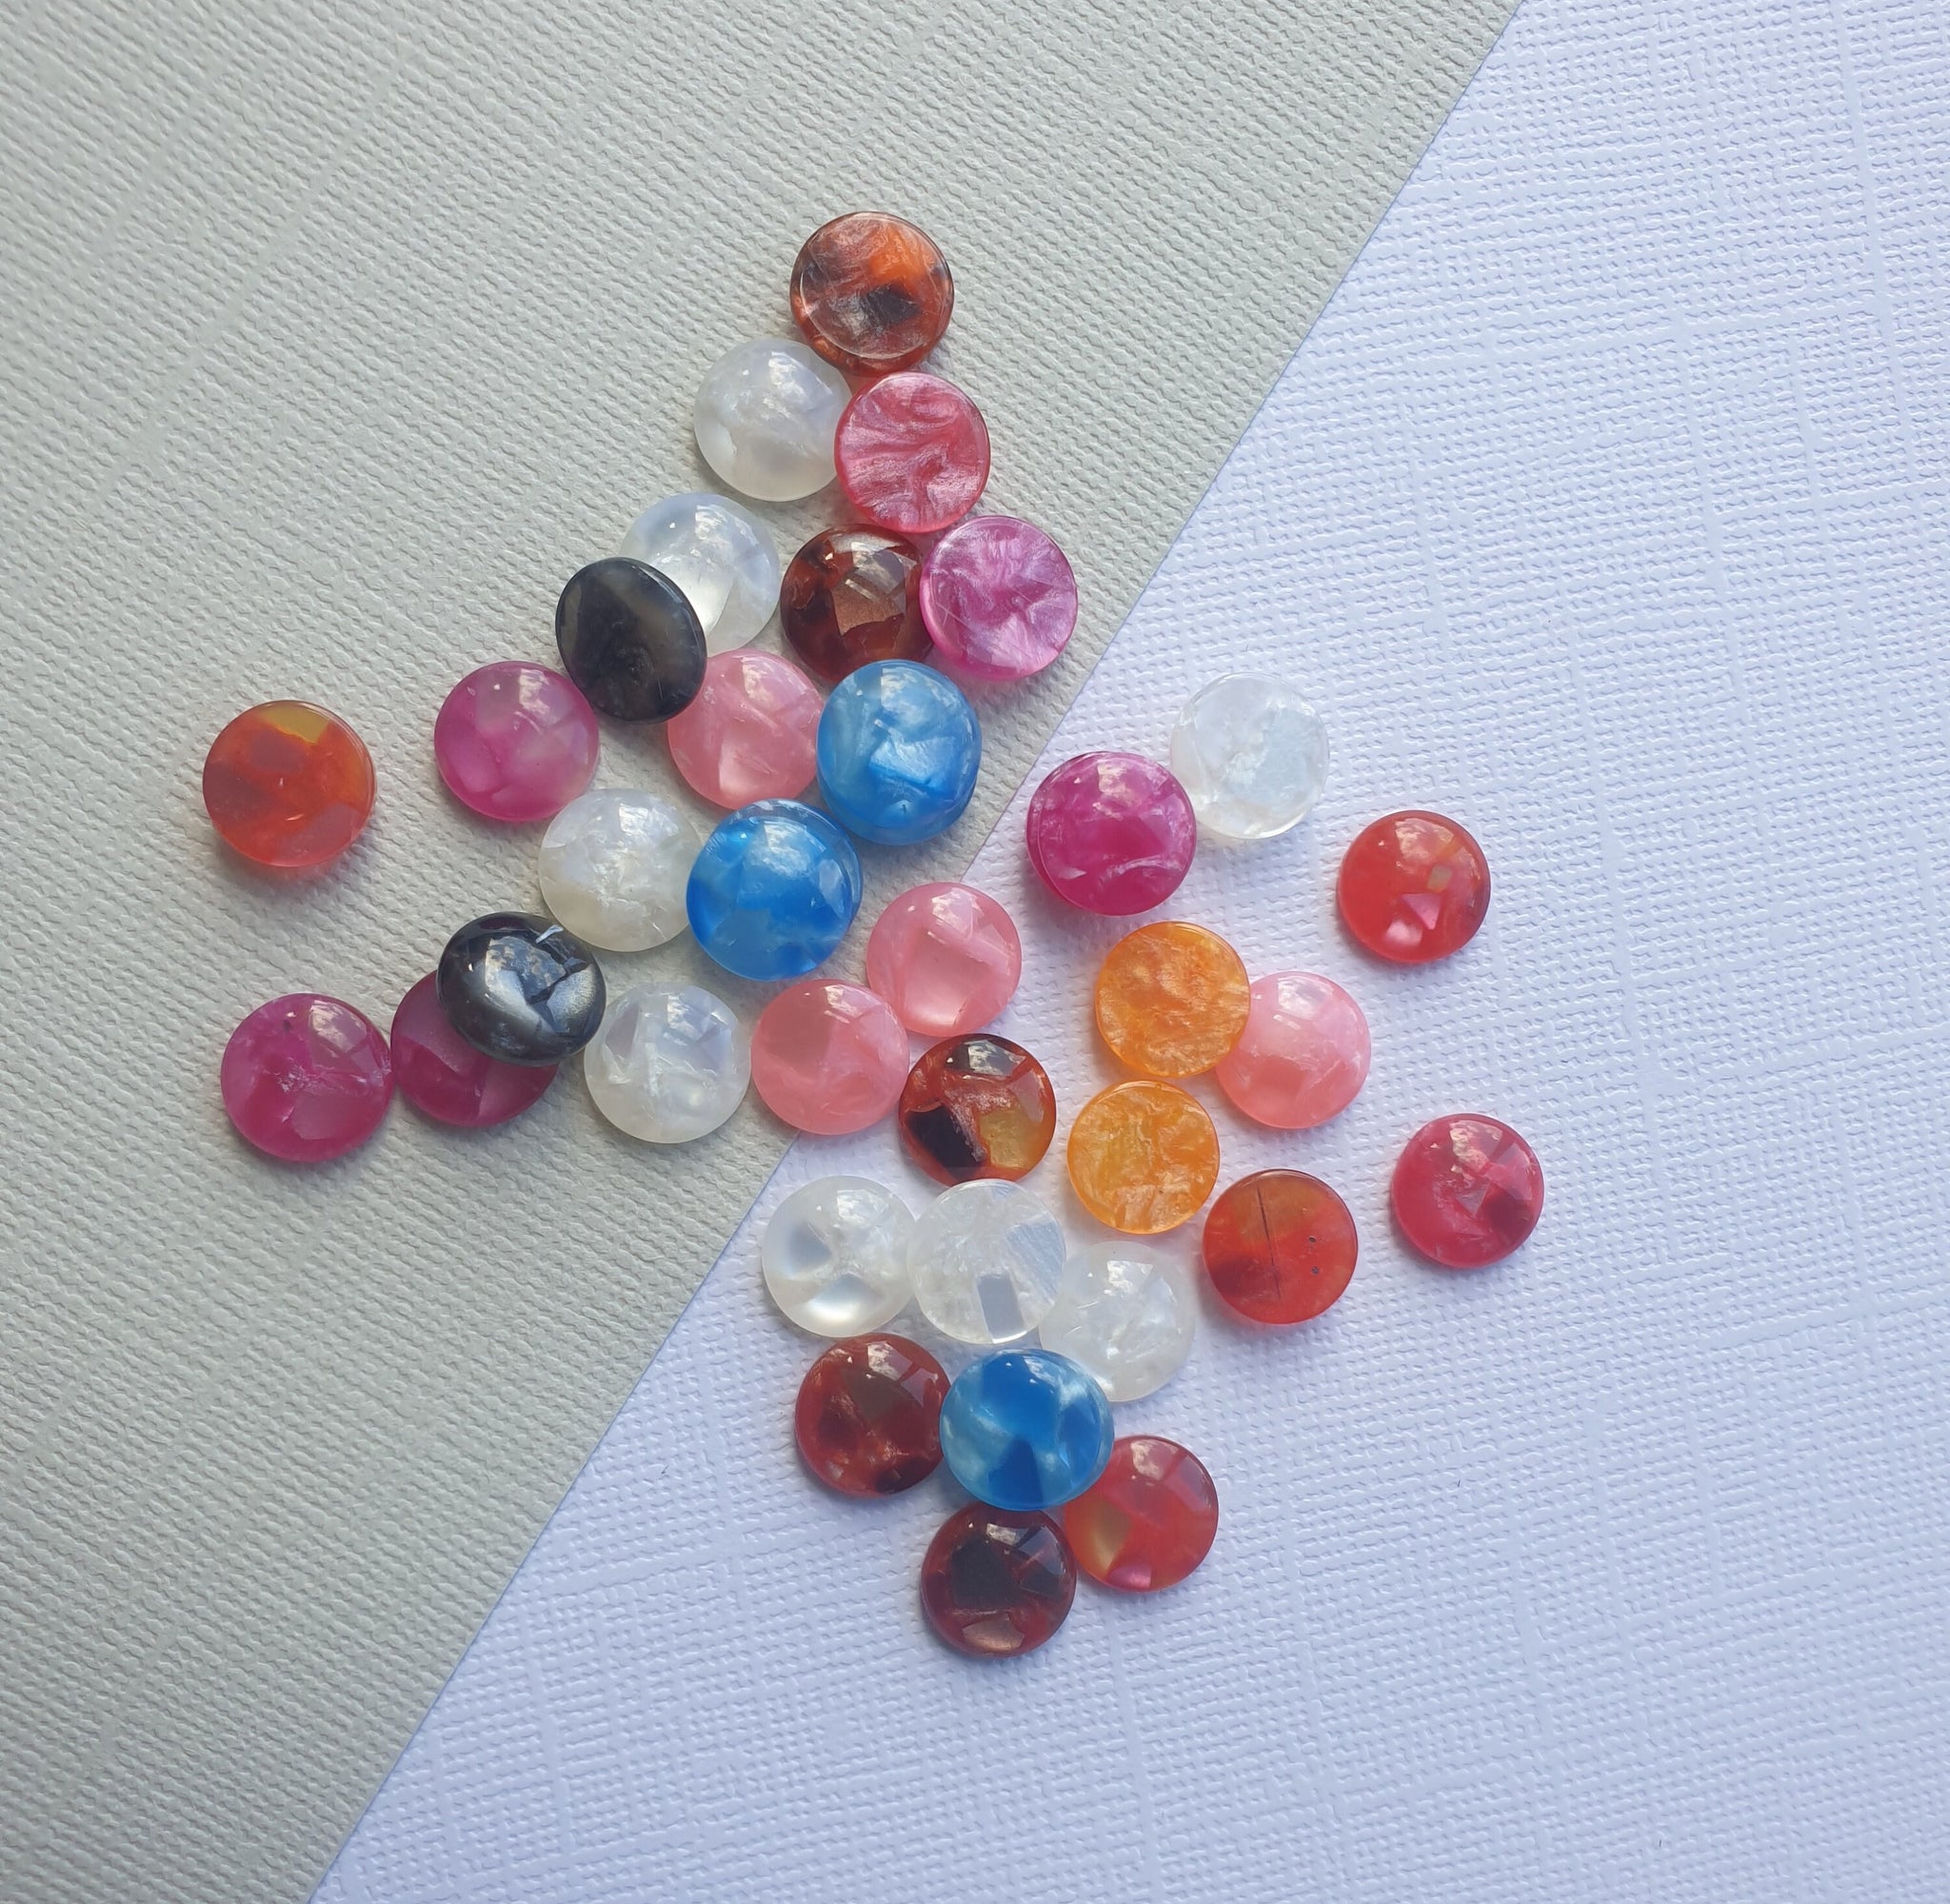 20pcs (10prs) 10mm Mix Colors cabochon,  Built-in Shell Flat back, Resin Cabochons, diy earring supplies, jewellery findings australia